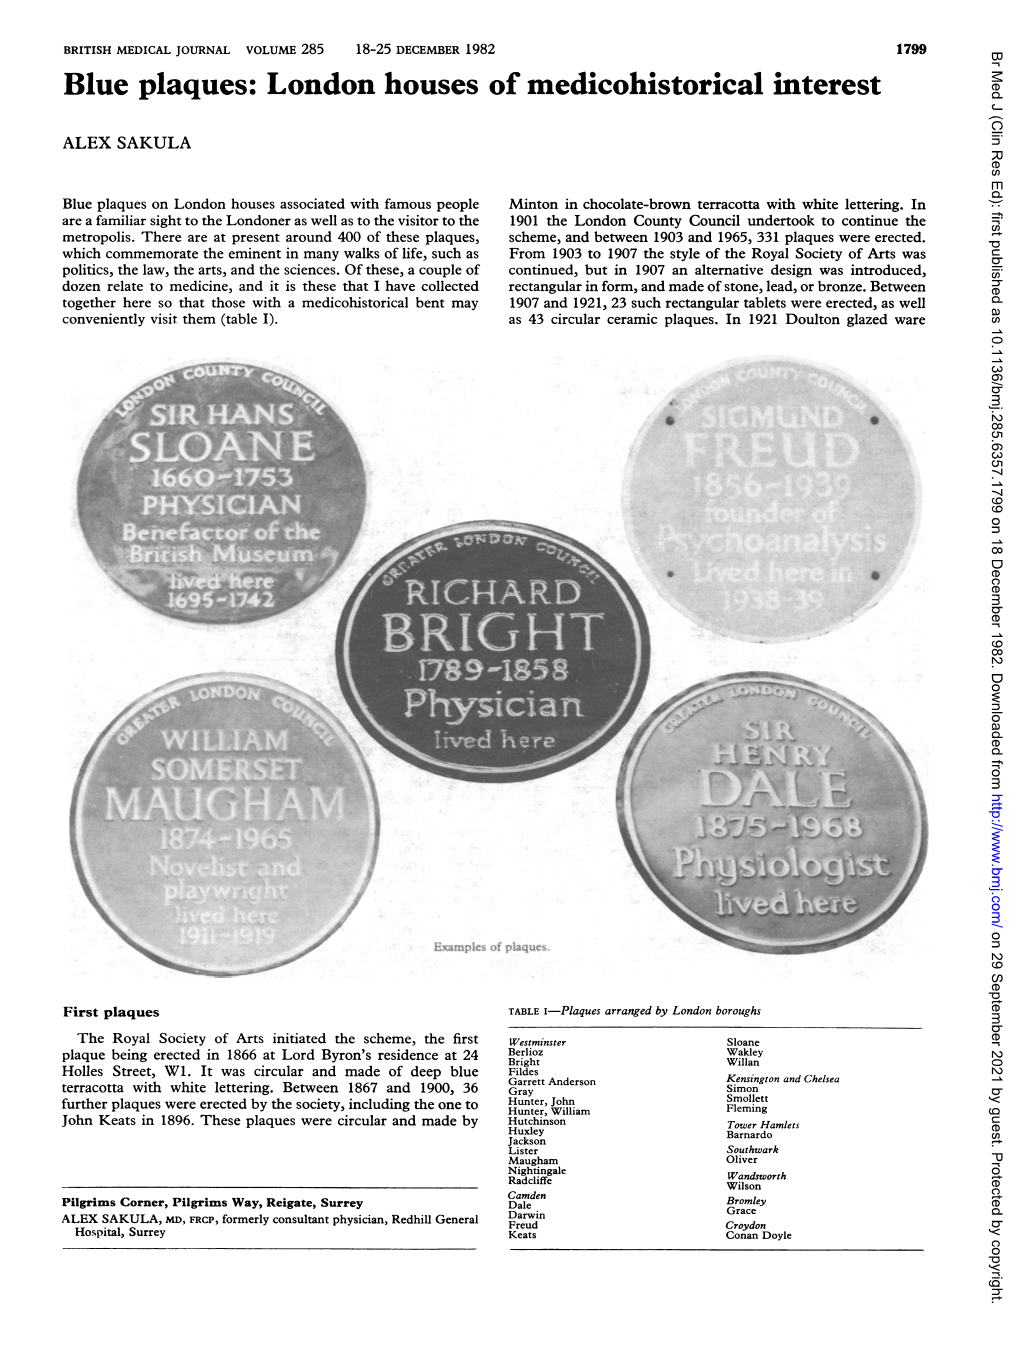 Blue Plaques: London Houses of Medicohistorical Interest